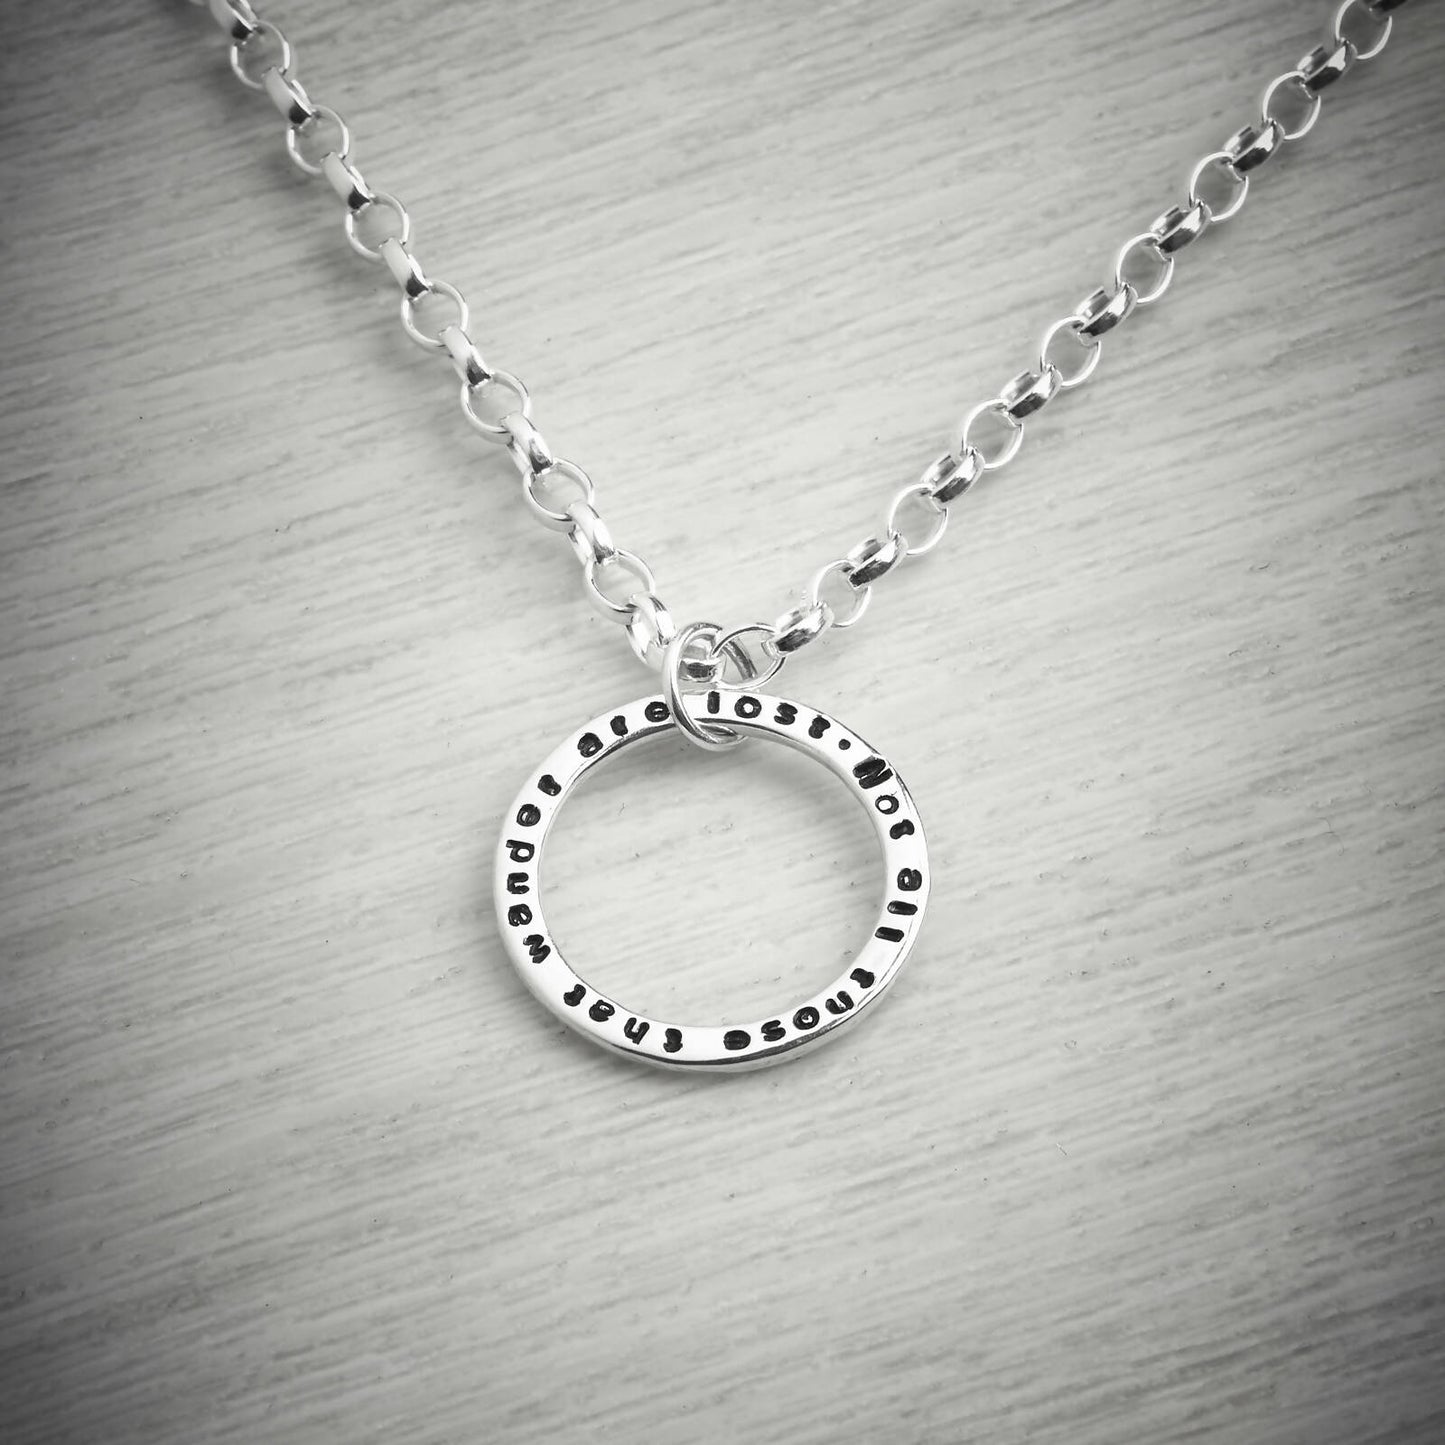 The 'All That Wander' Personalised Necklace by Emma White